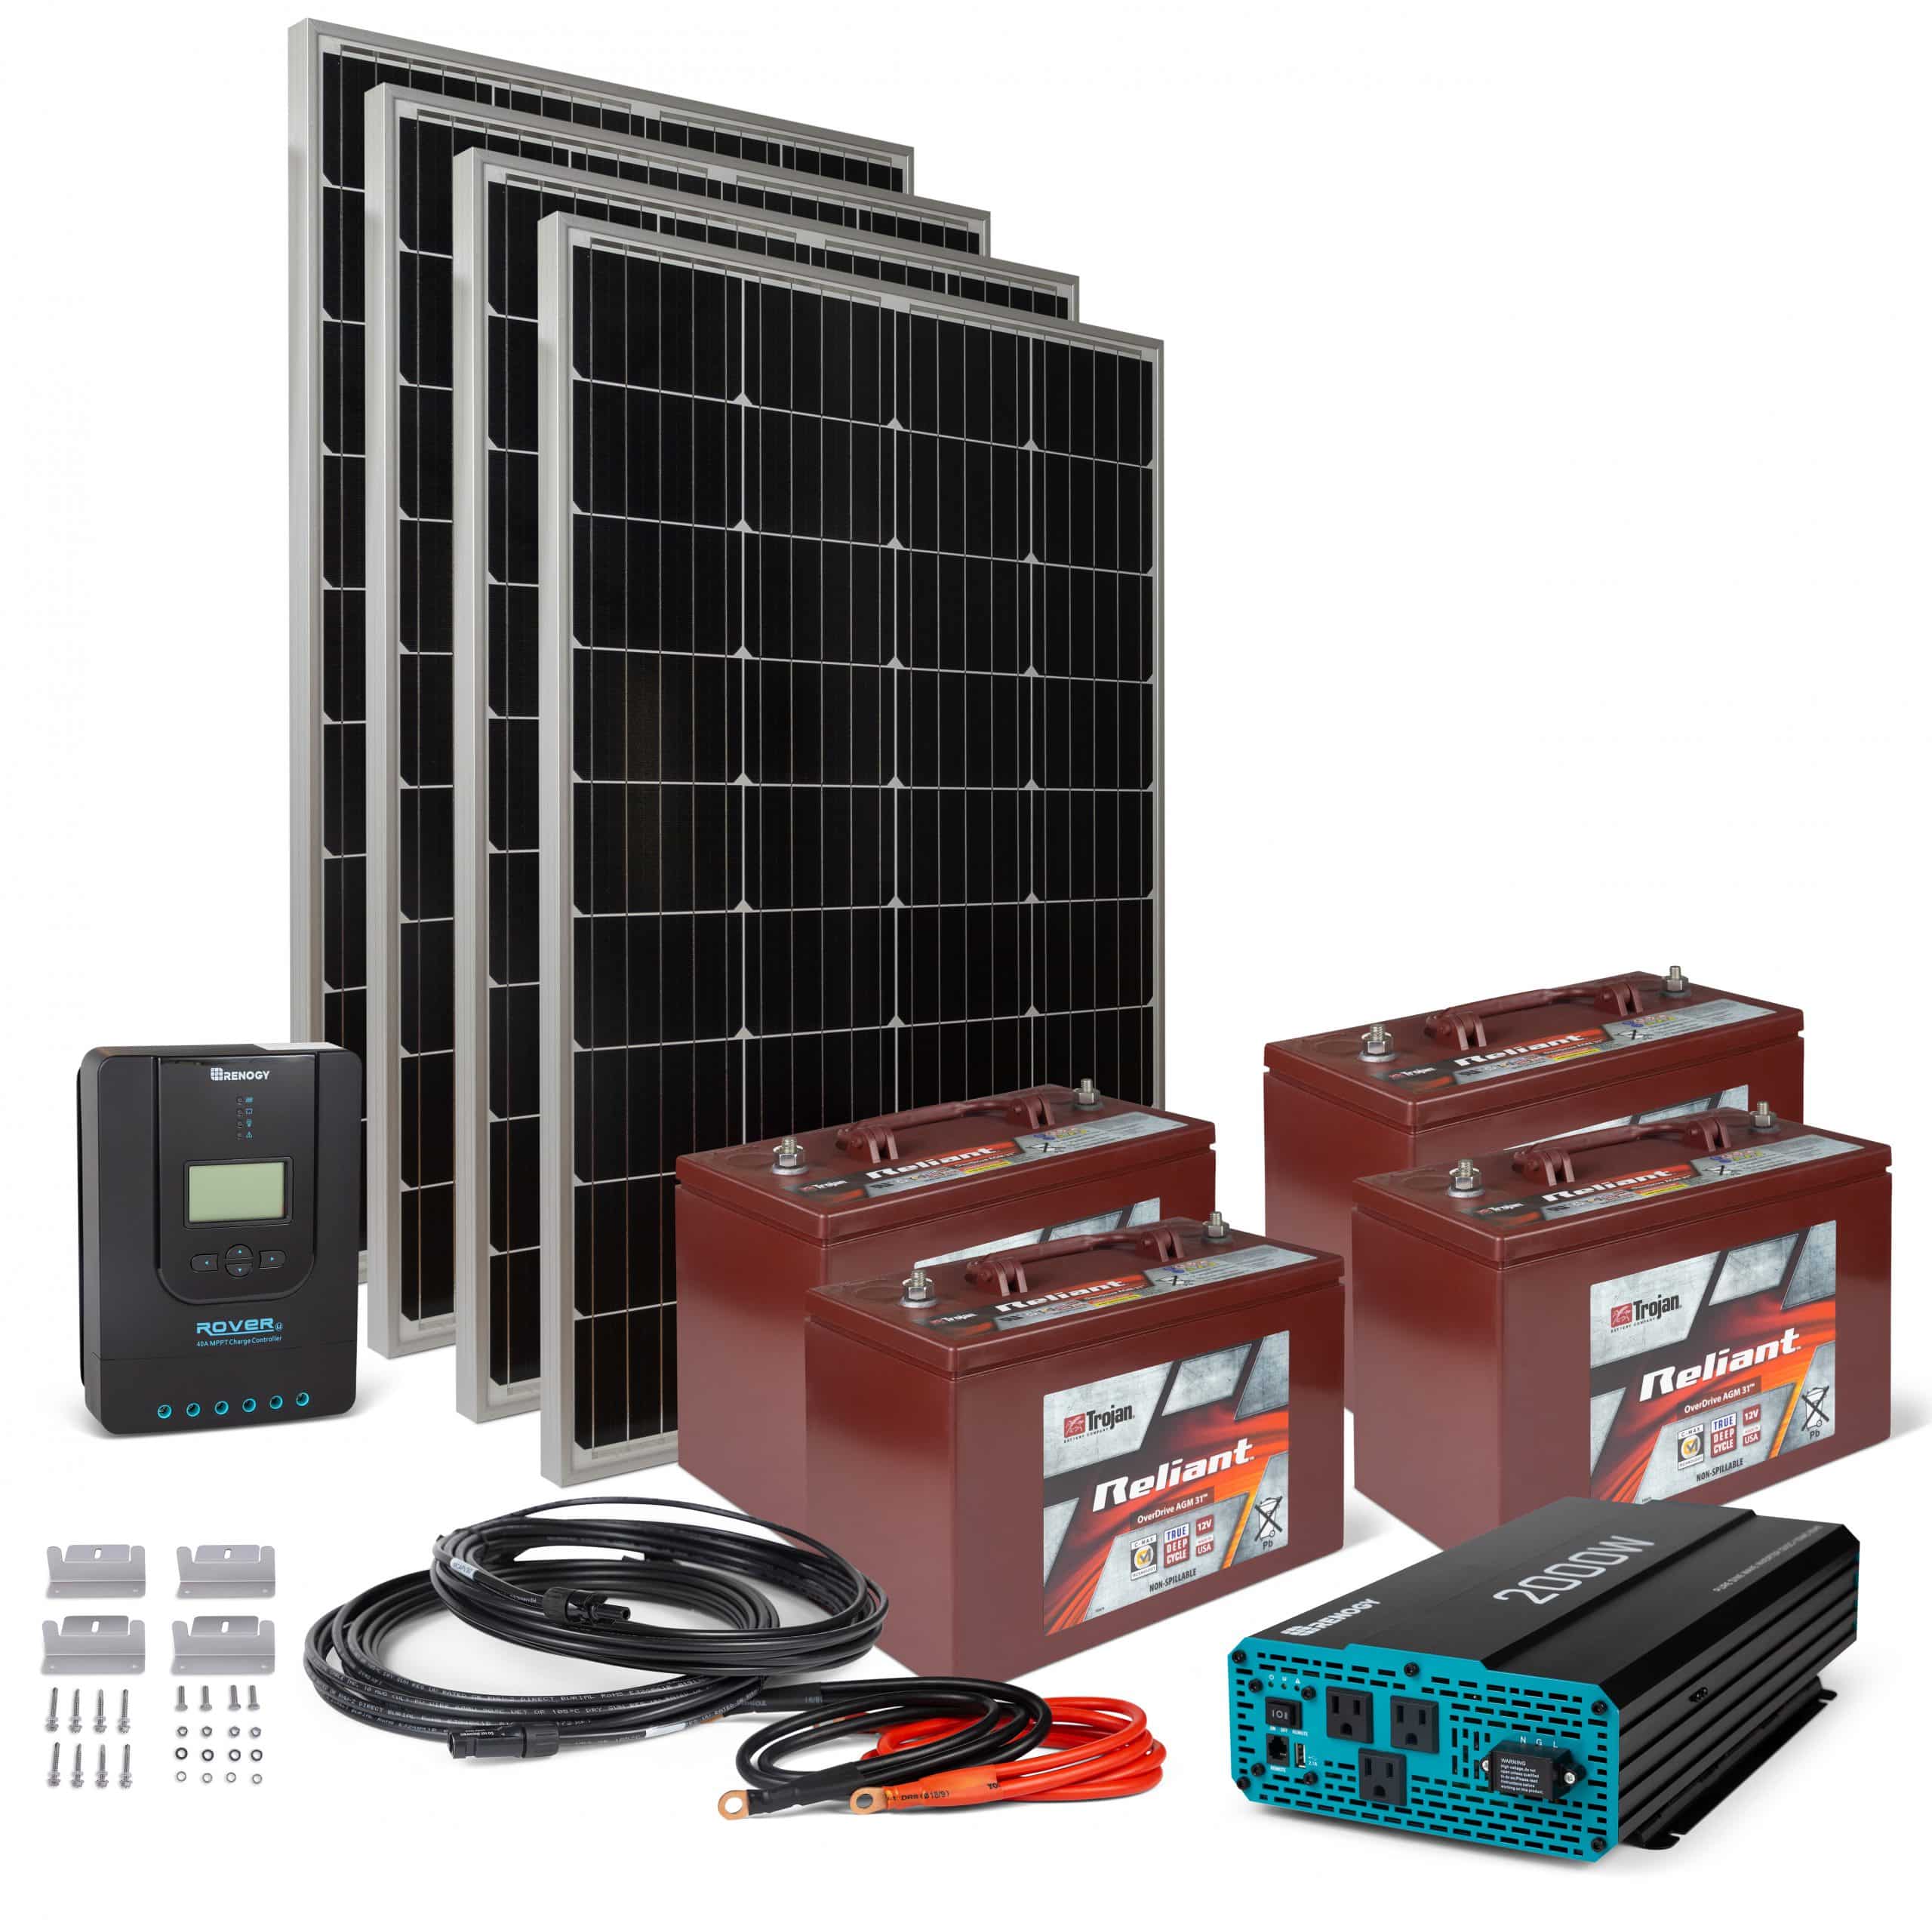 Adventurer 1200 Off-Grid Solar Kit for Cabins, Homes, RVs, Outdoors